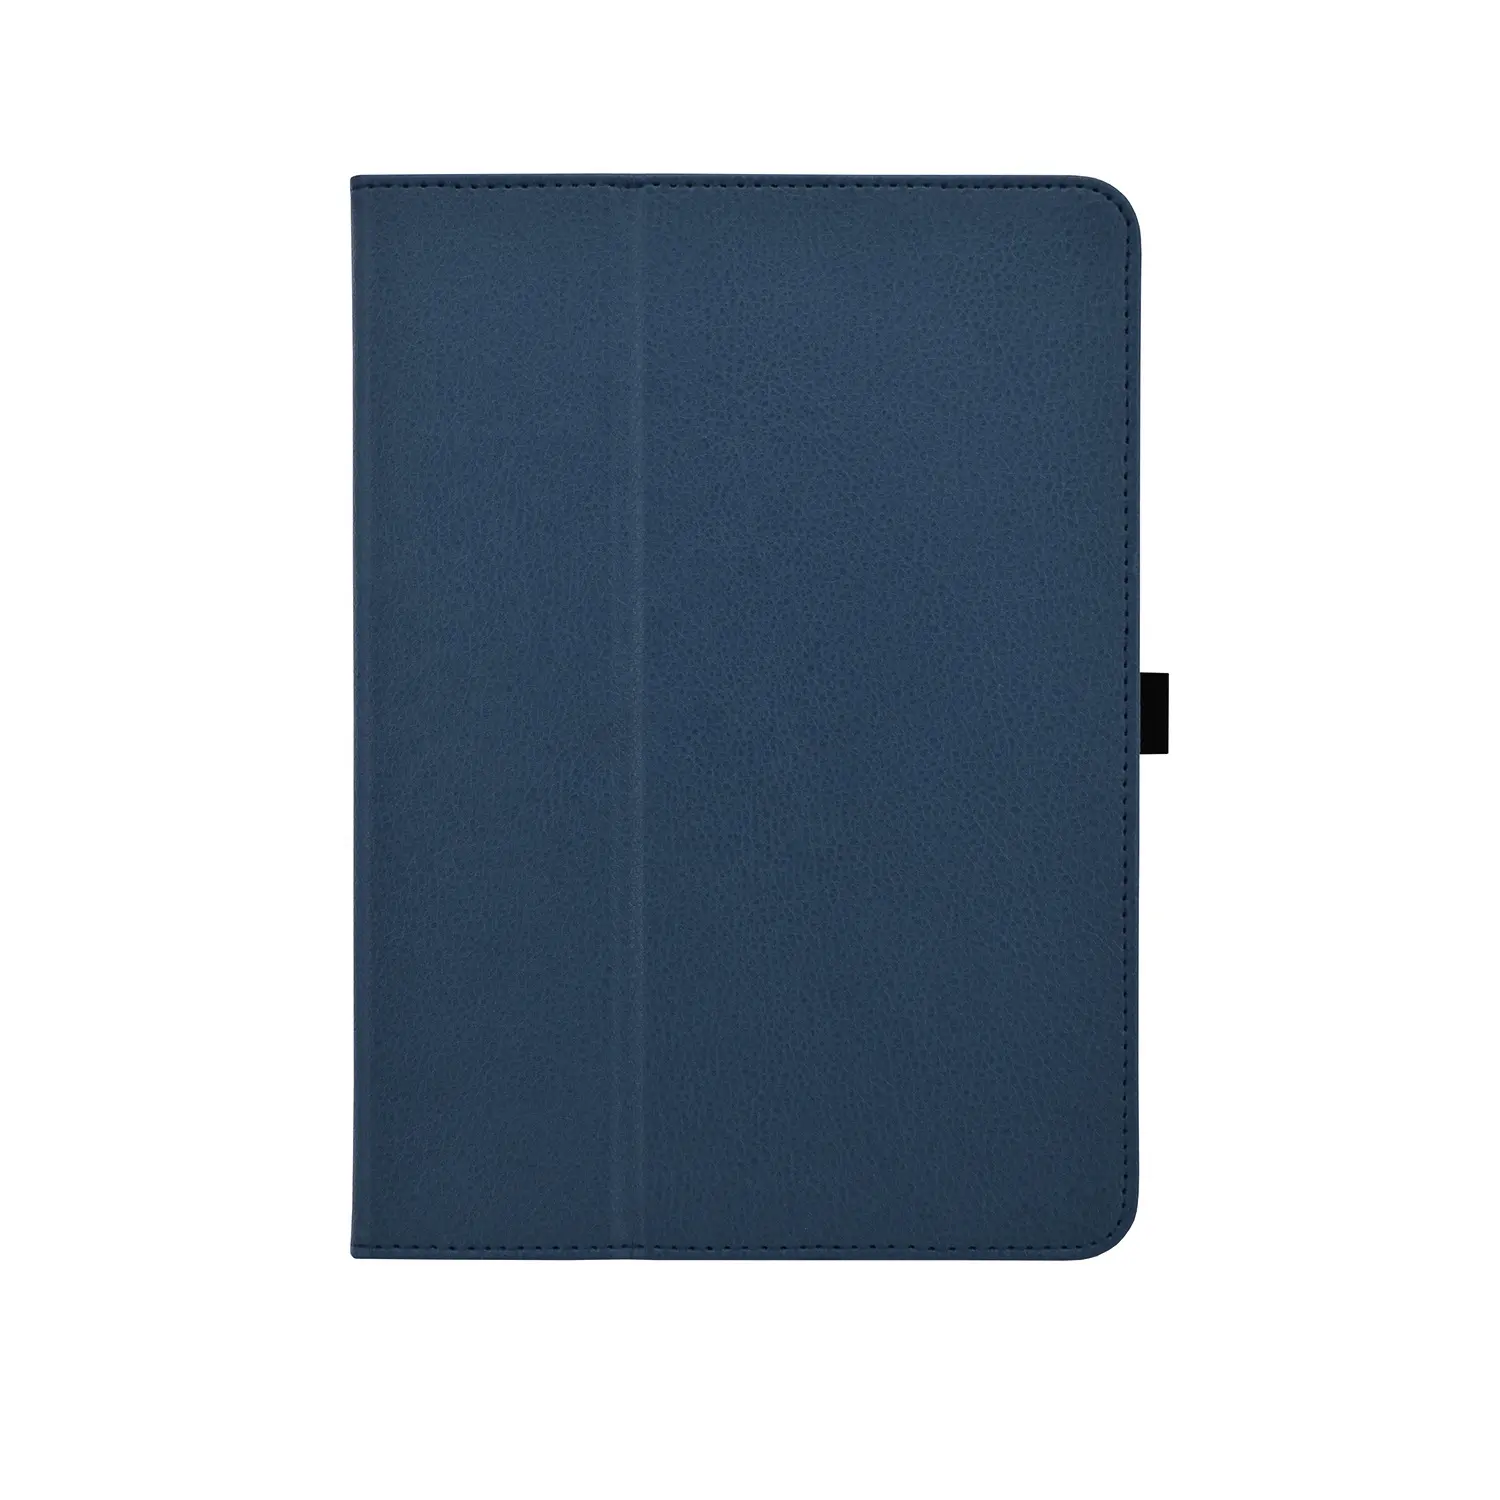 PU Leather Back Stand Case Cover for SAMSUNG Galaxy TAB S3 (9.7) / T820/ T825